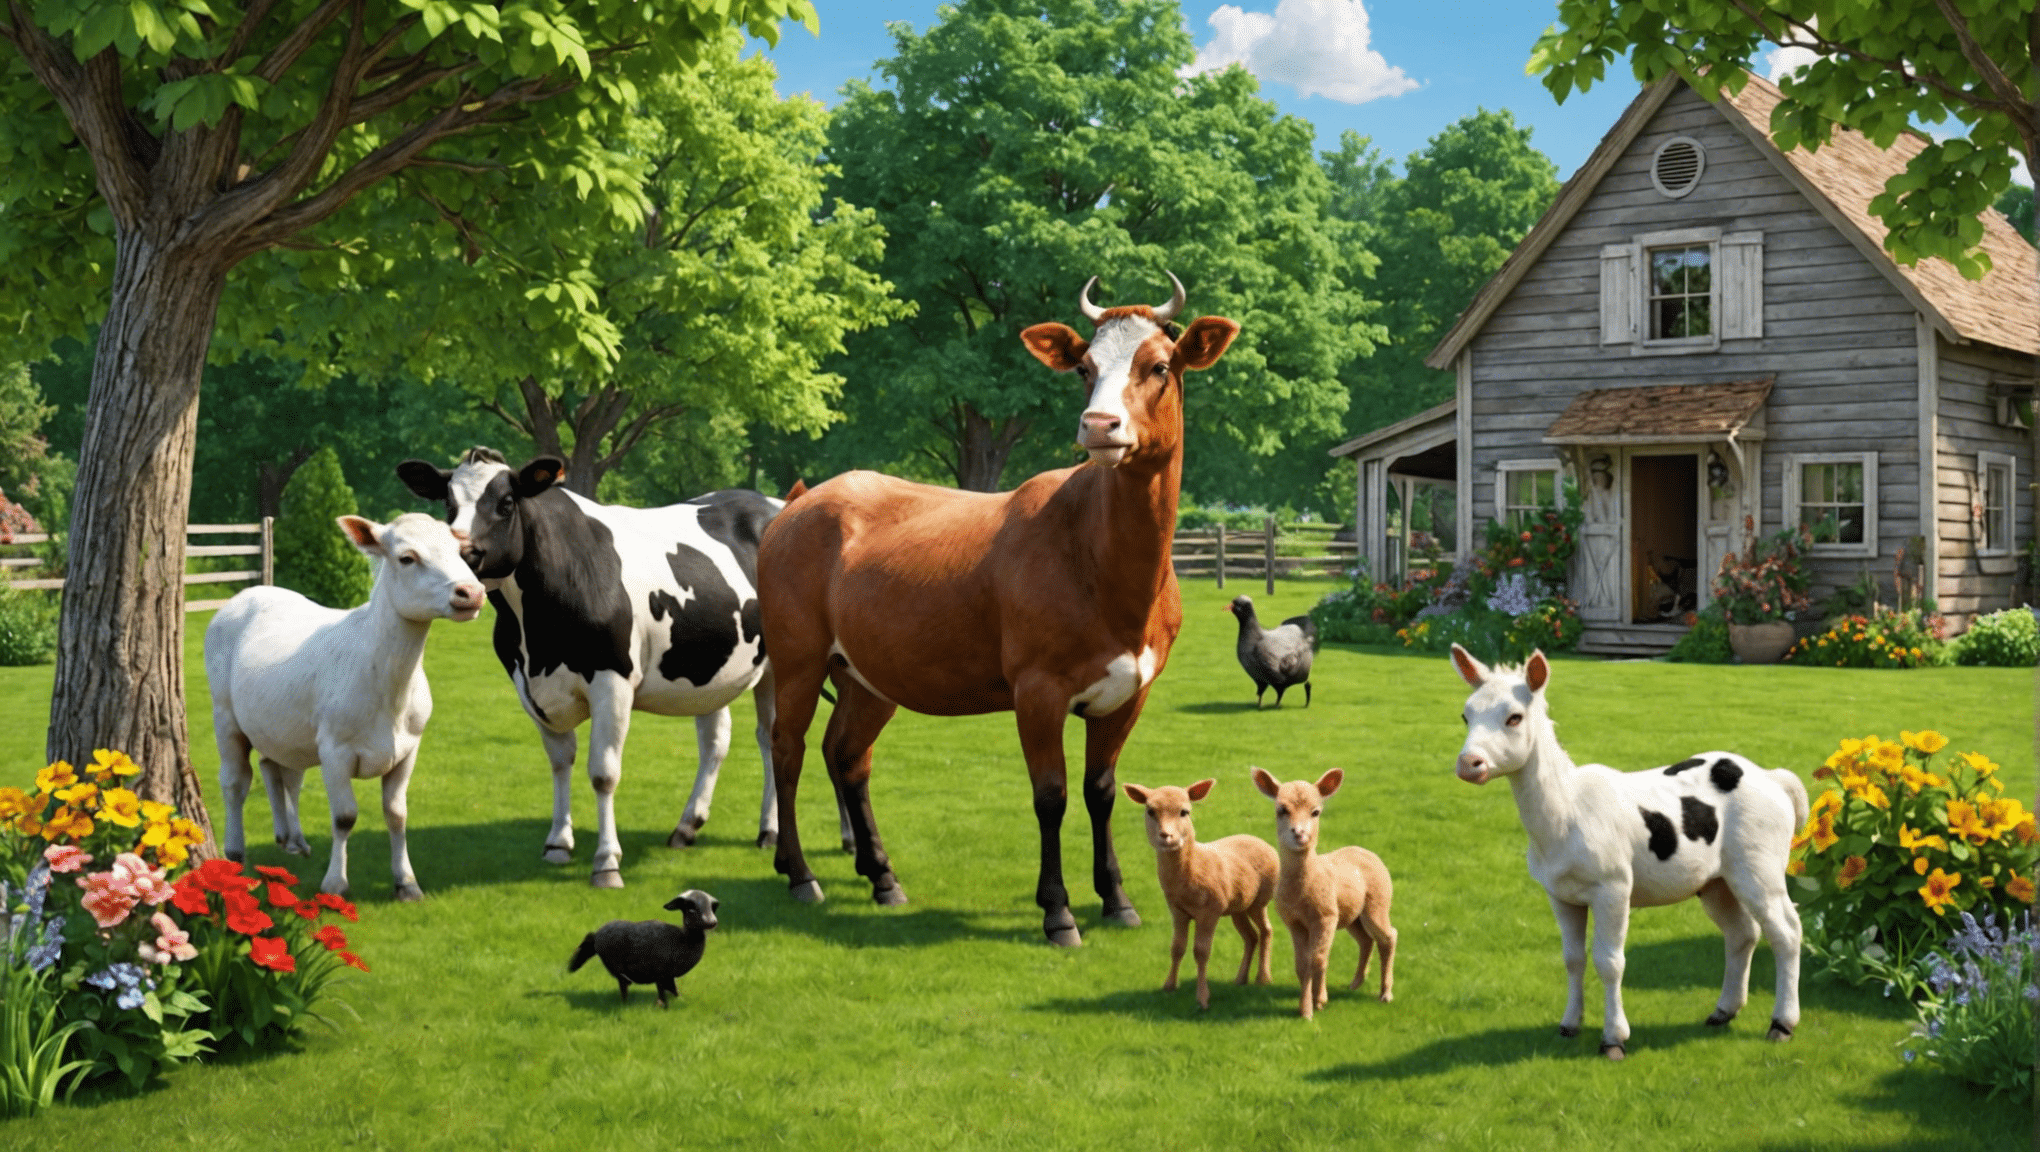 discover the best farm animals for your backyard environment and uncover their unique characteristics and benefits. learn how these animals can thrive in a smaller space and contribute to a sustainable and enjoyable lifestyle.